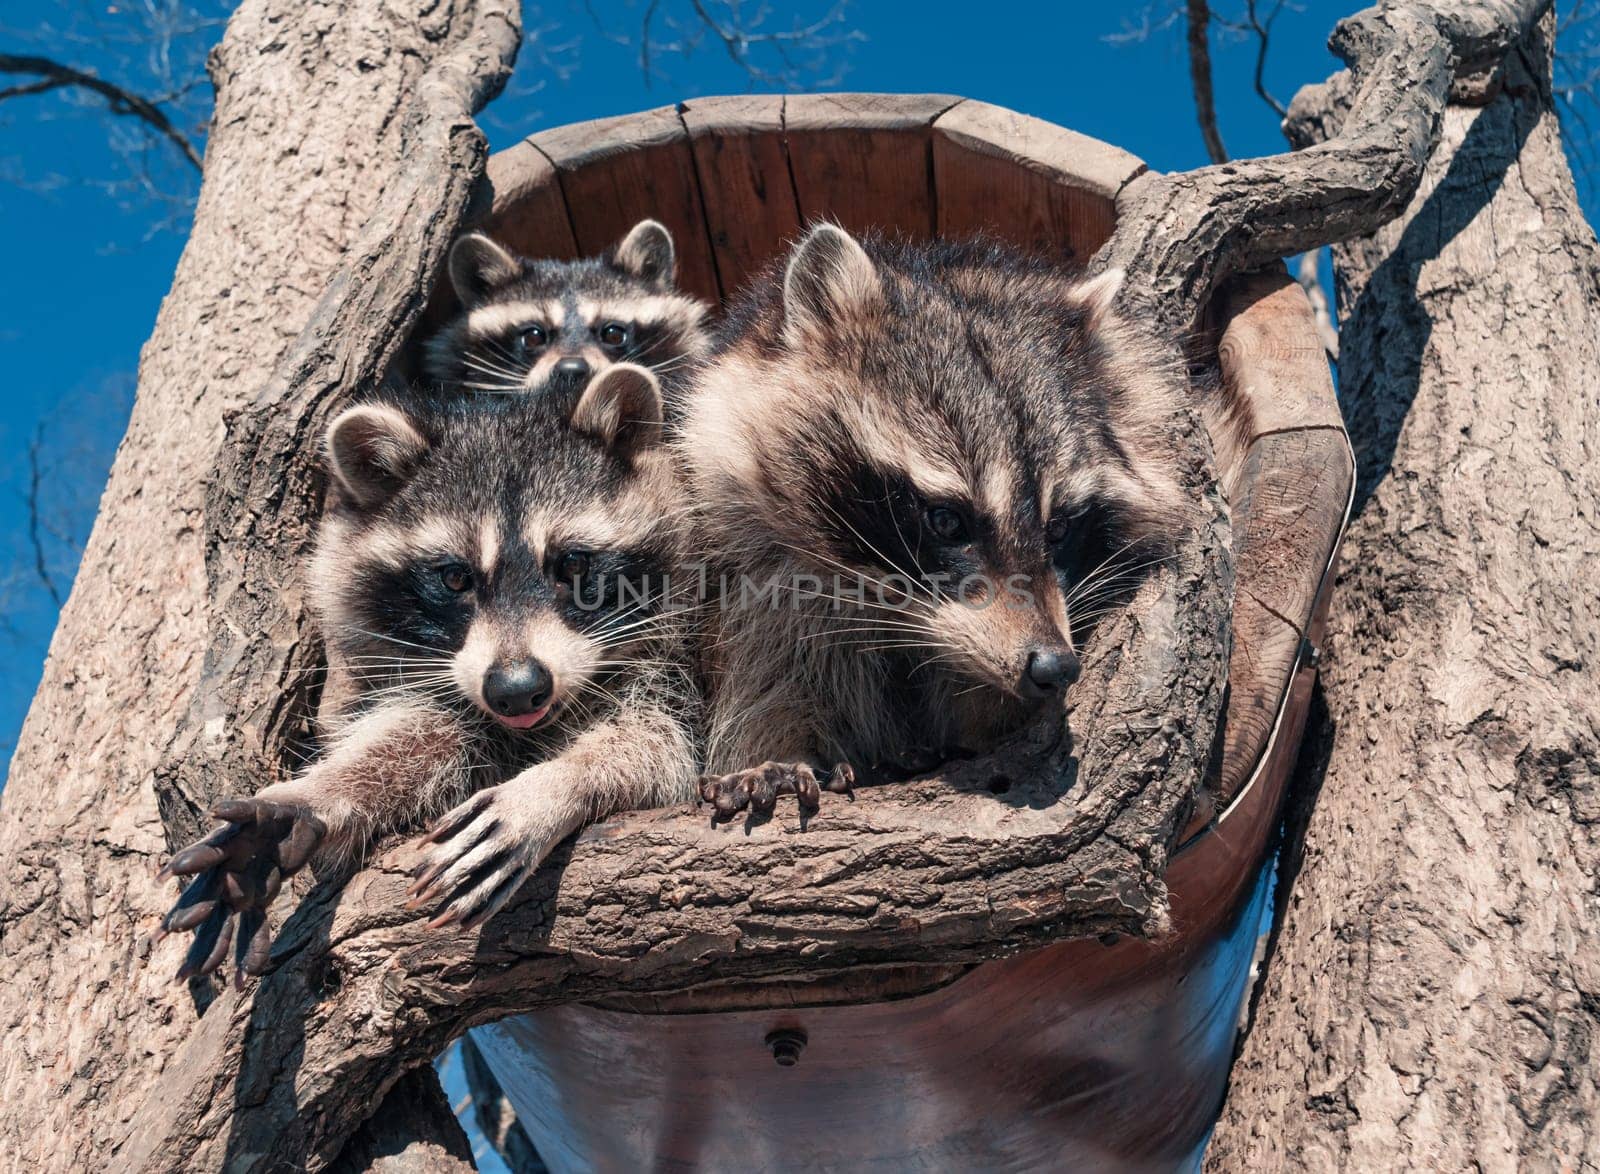 A group of three raccoons is huddled inside the hollow of a tree, with one raccoon reaching out and the others looking on from within. by Busker